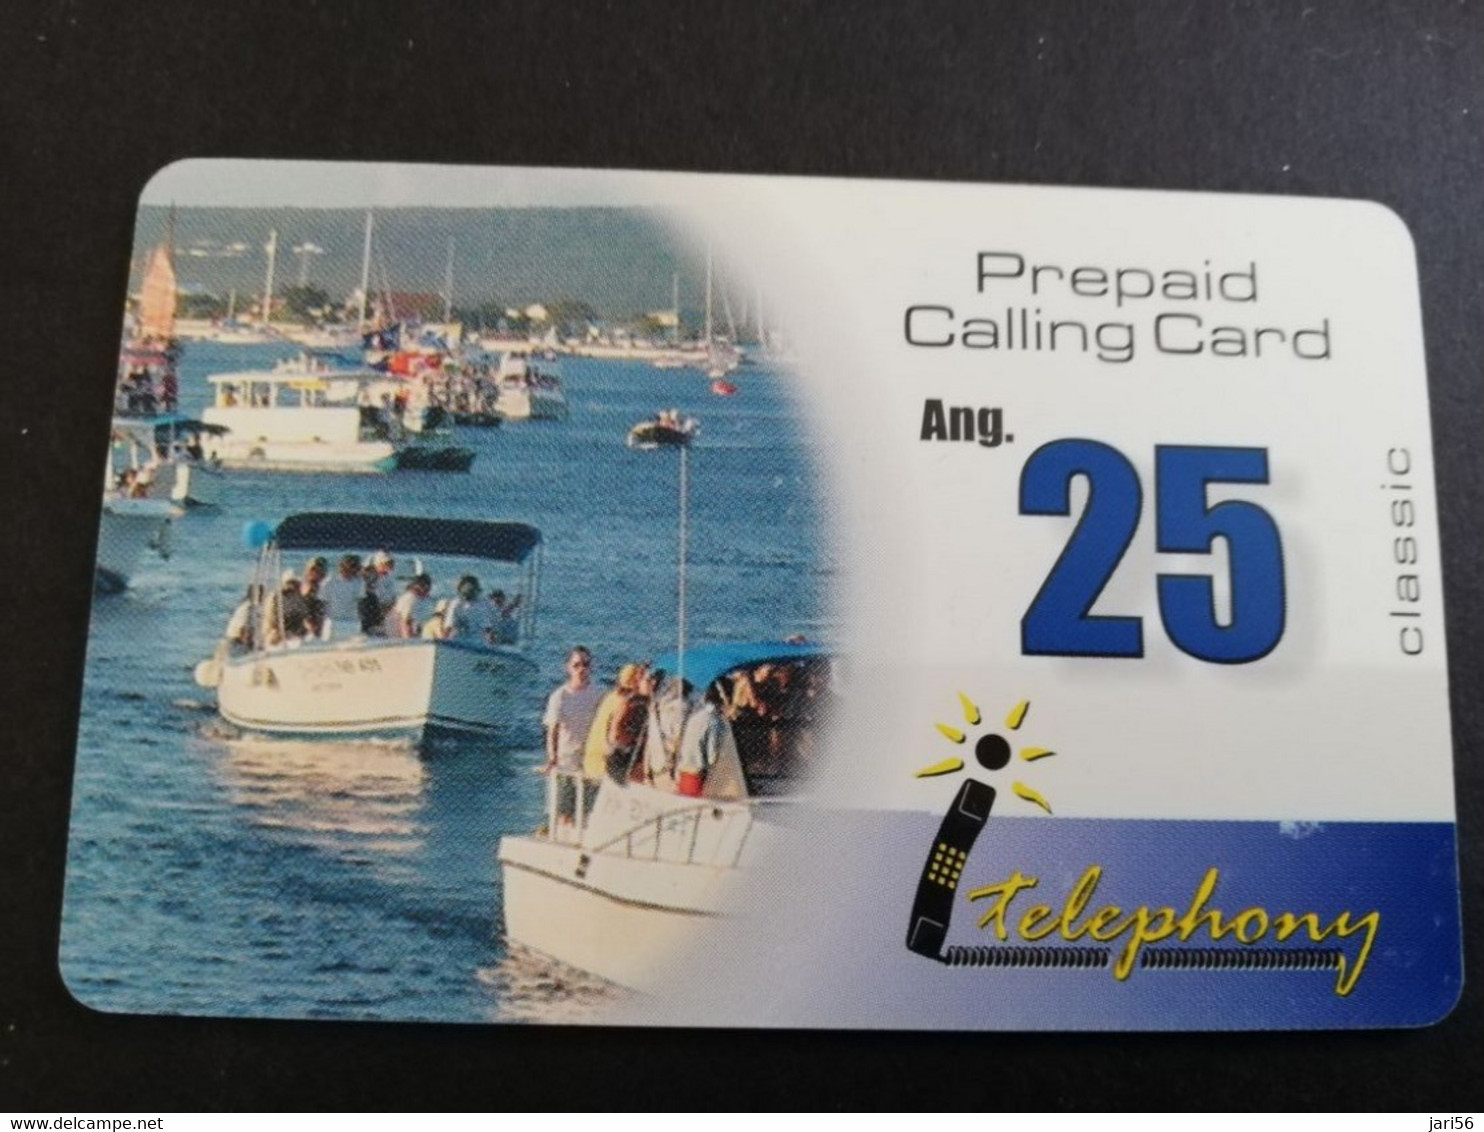 CURACAO PREPAIDS NAF 25,- I-TELEPHONY  BOATS (THICK CARD)  VERY FINE USED CARD        ** 5305AA** - Antillen (Niederländische)